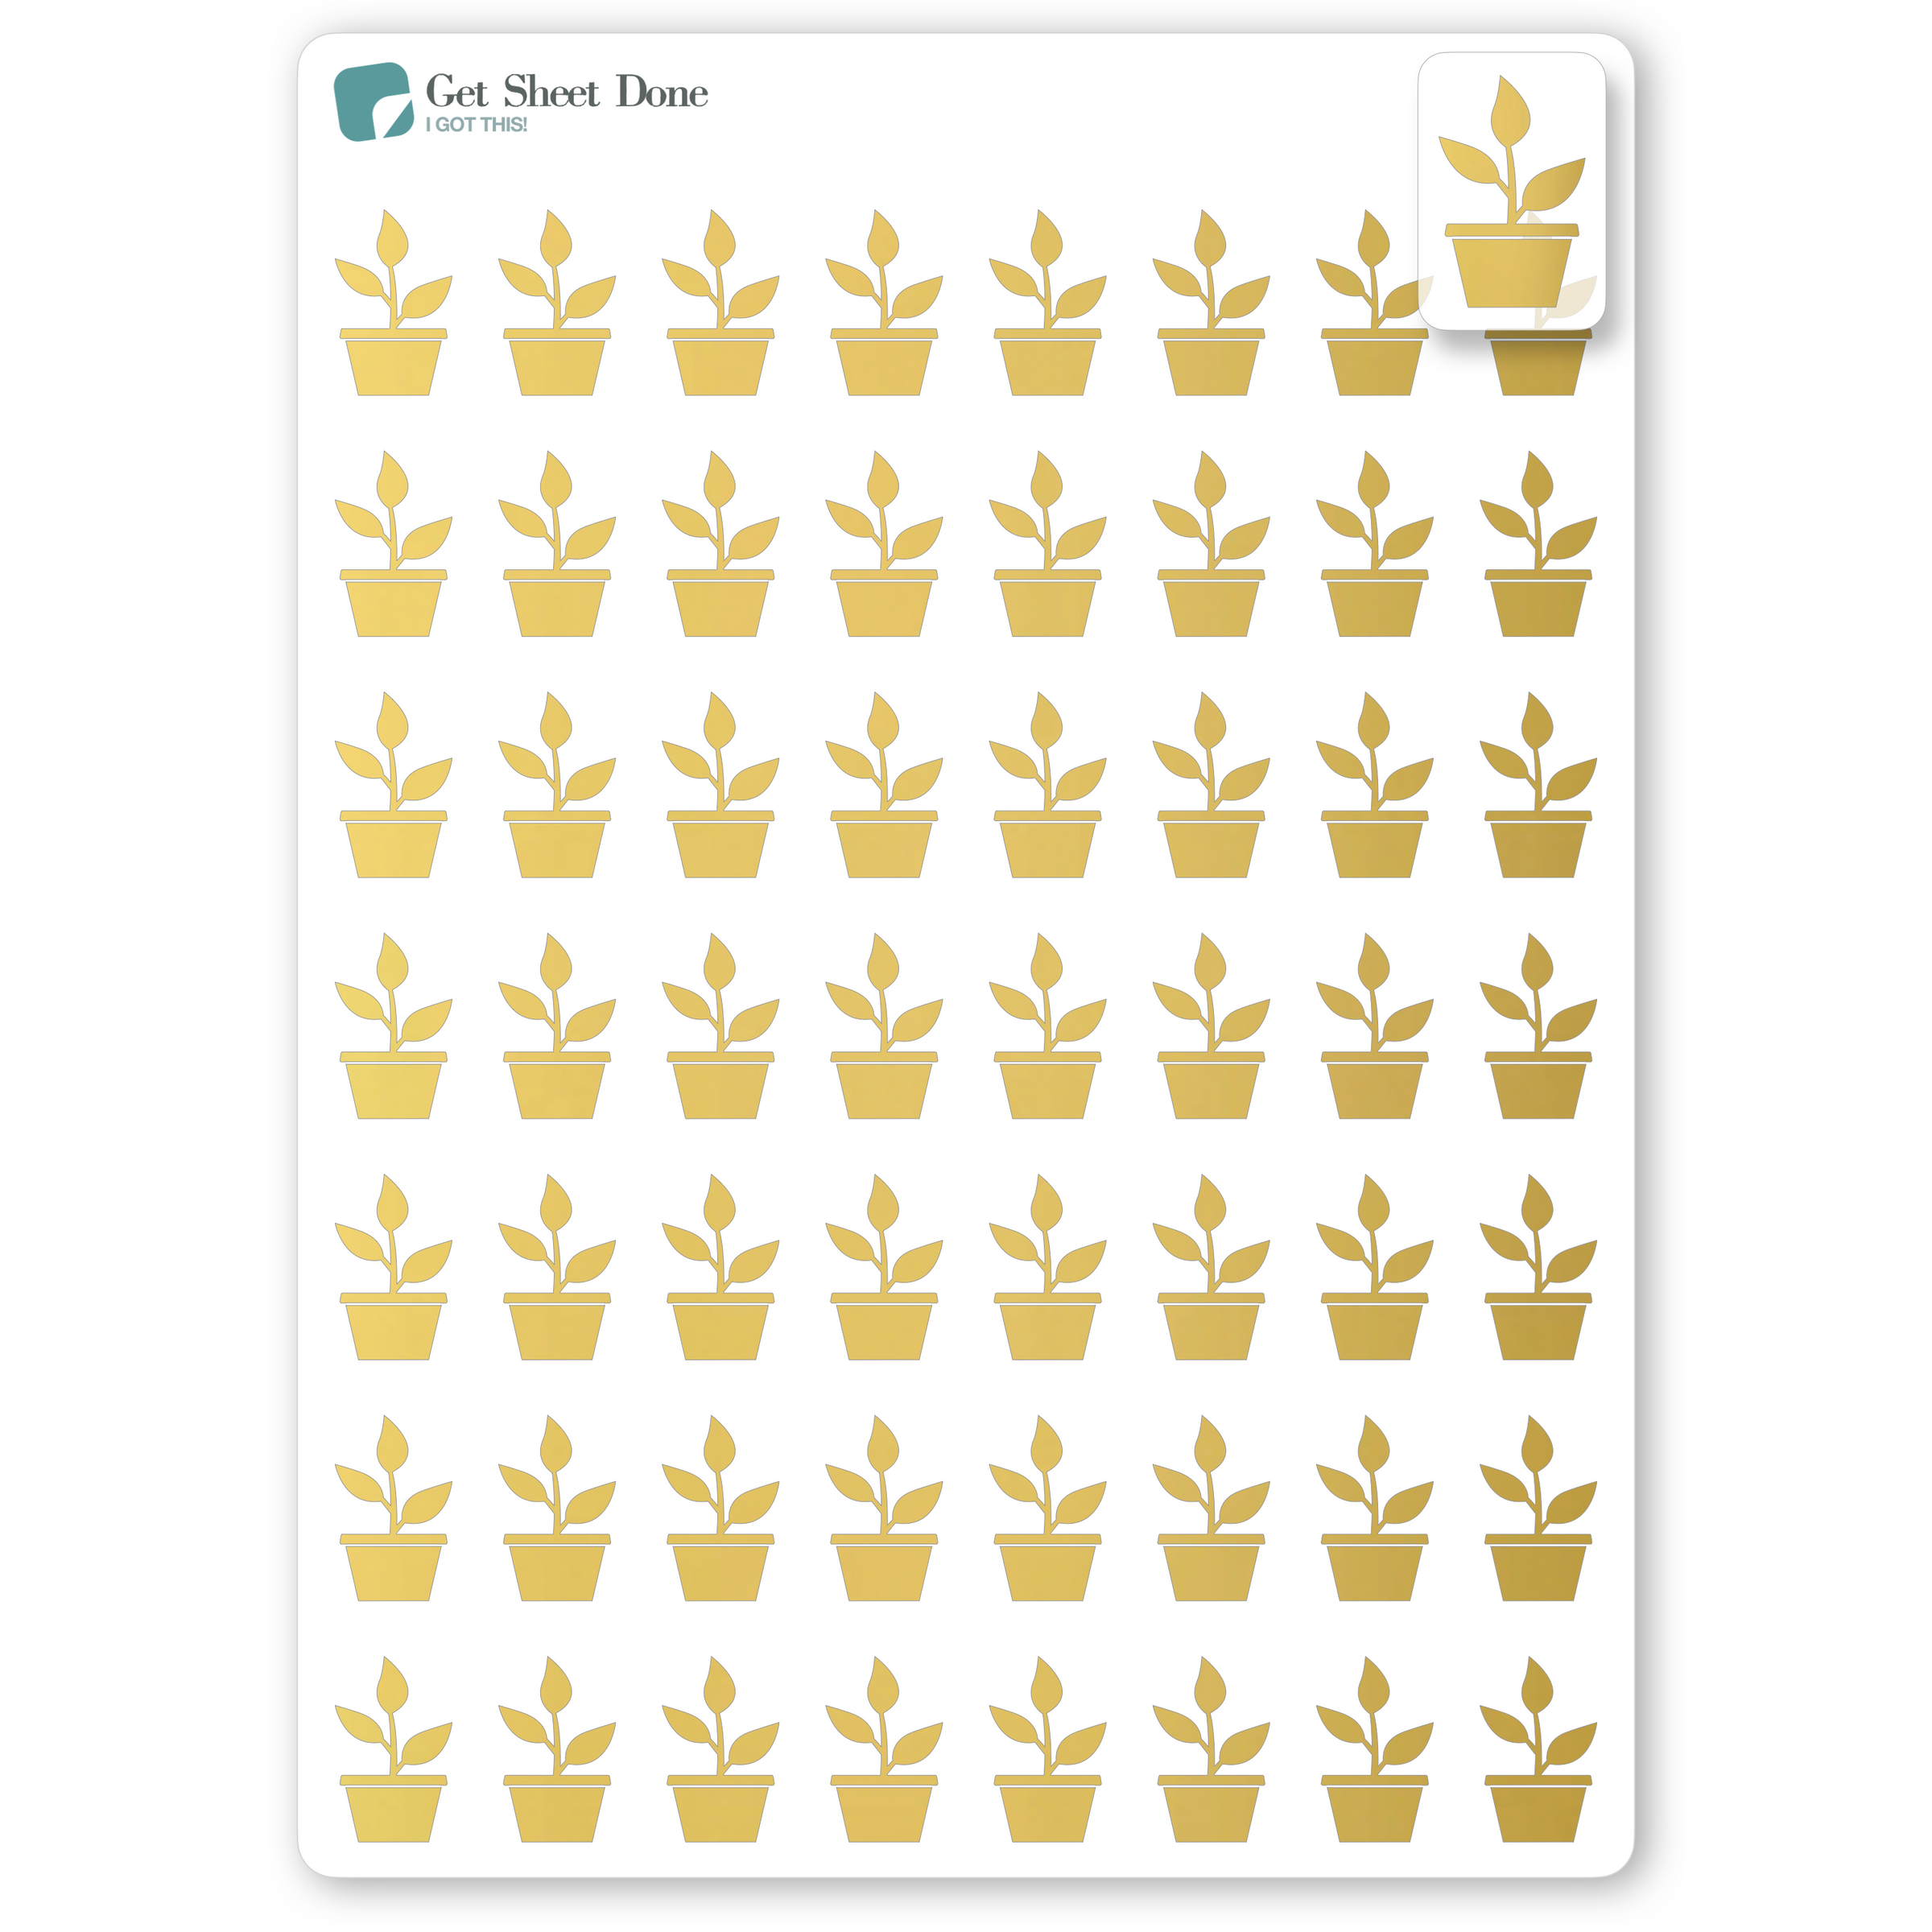 Foiled Plant Stickers.